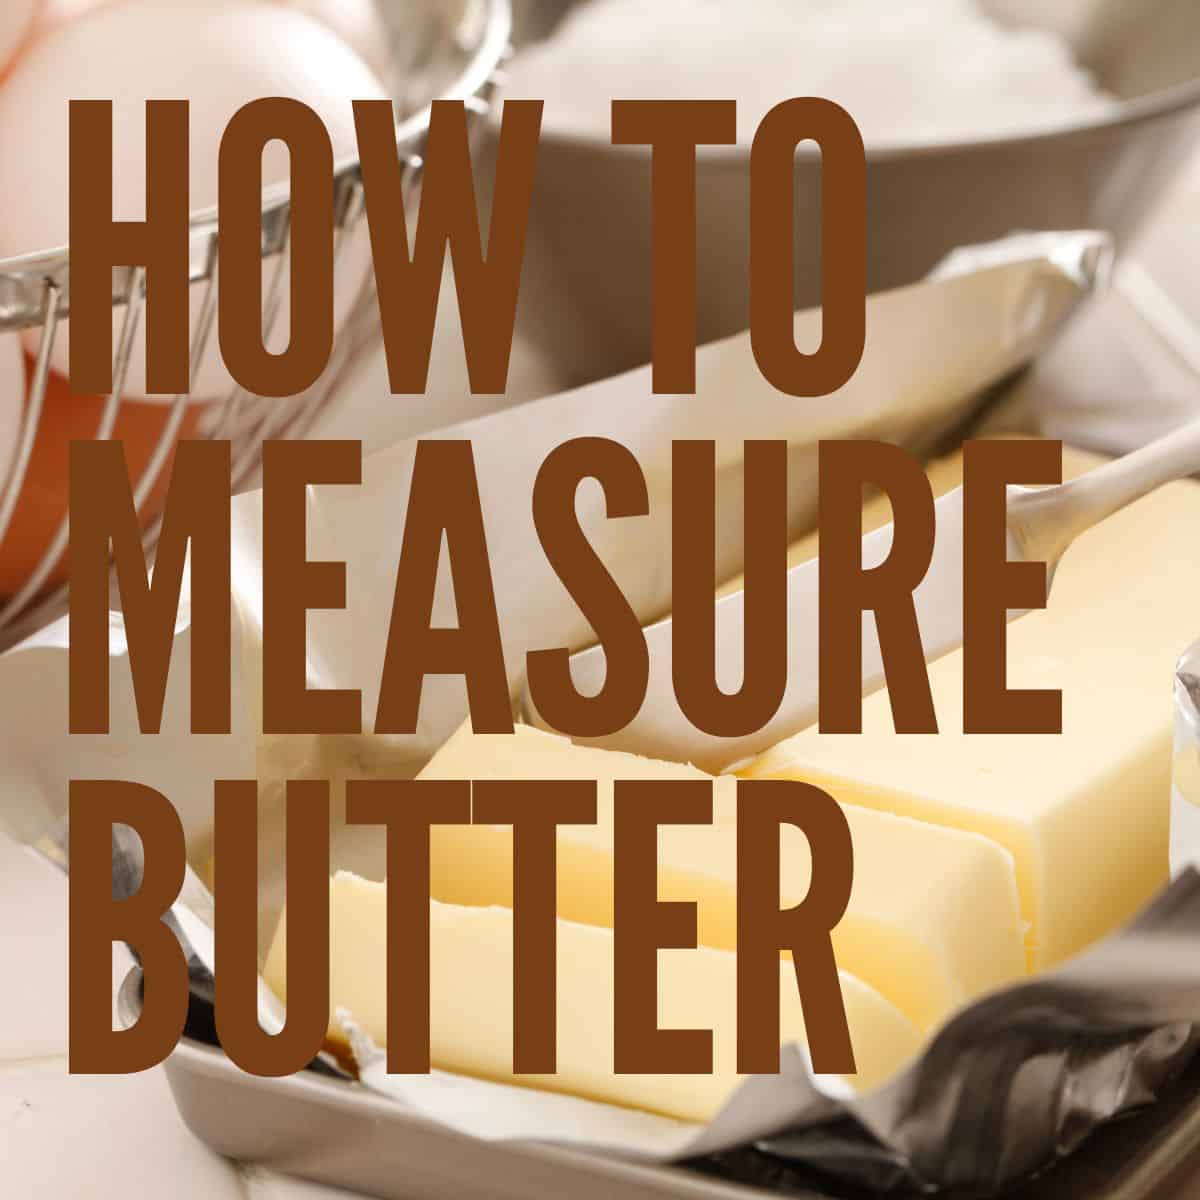 Measuring butter by slicing it